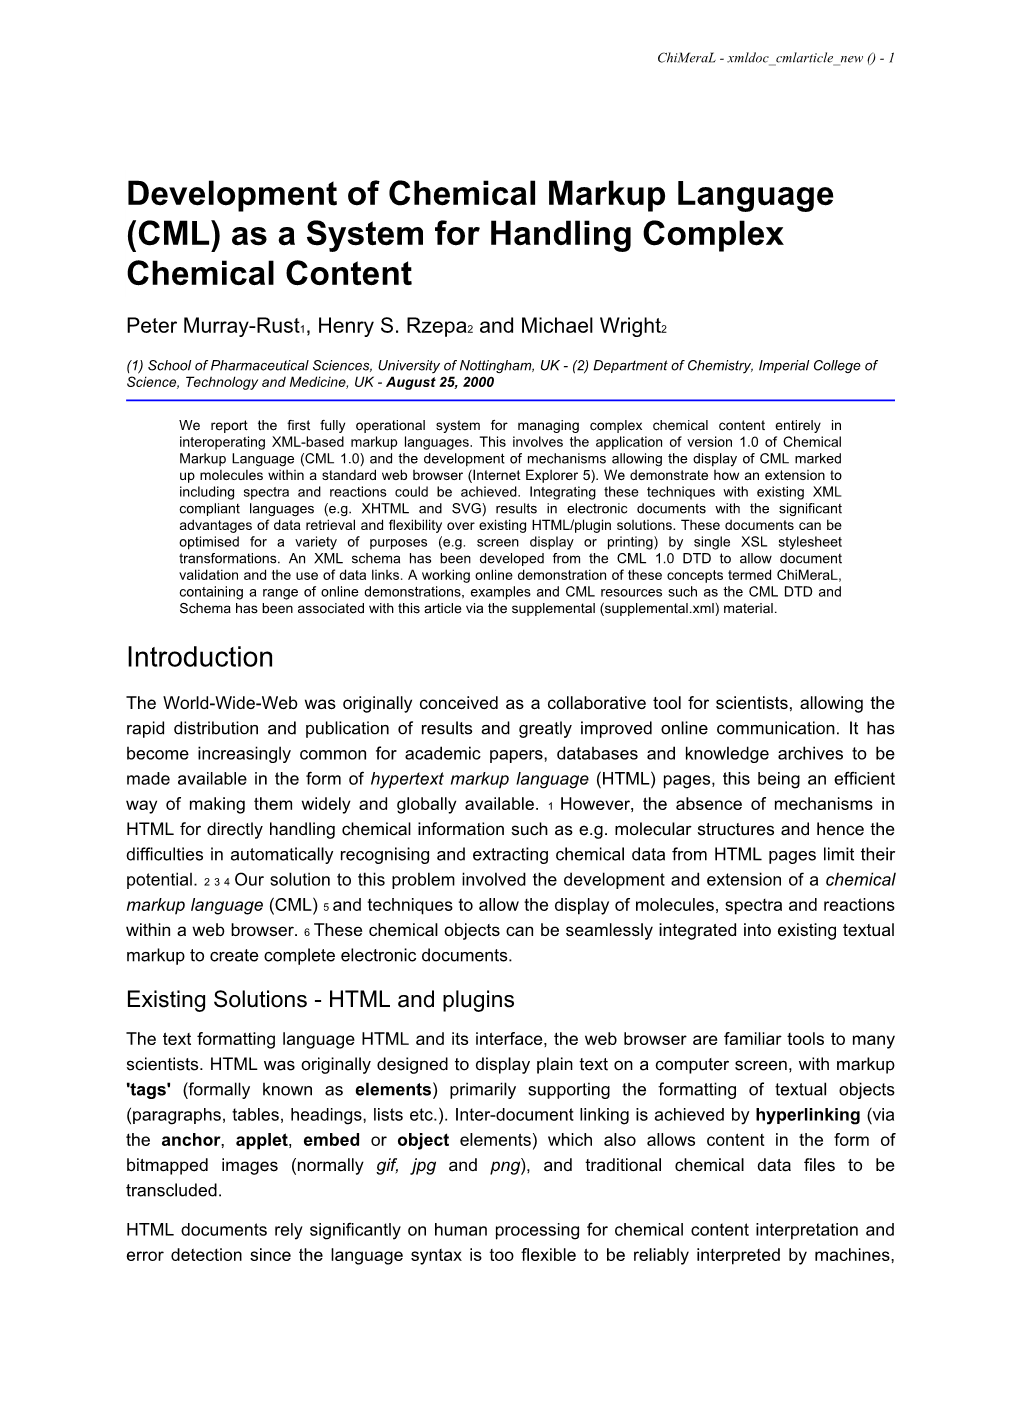 Development of Chemical Markup Language (CML) As a System for Handling Complex Chemical Content